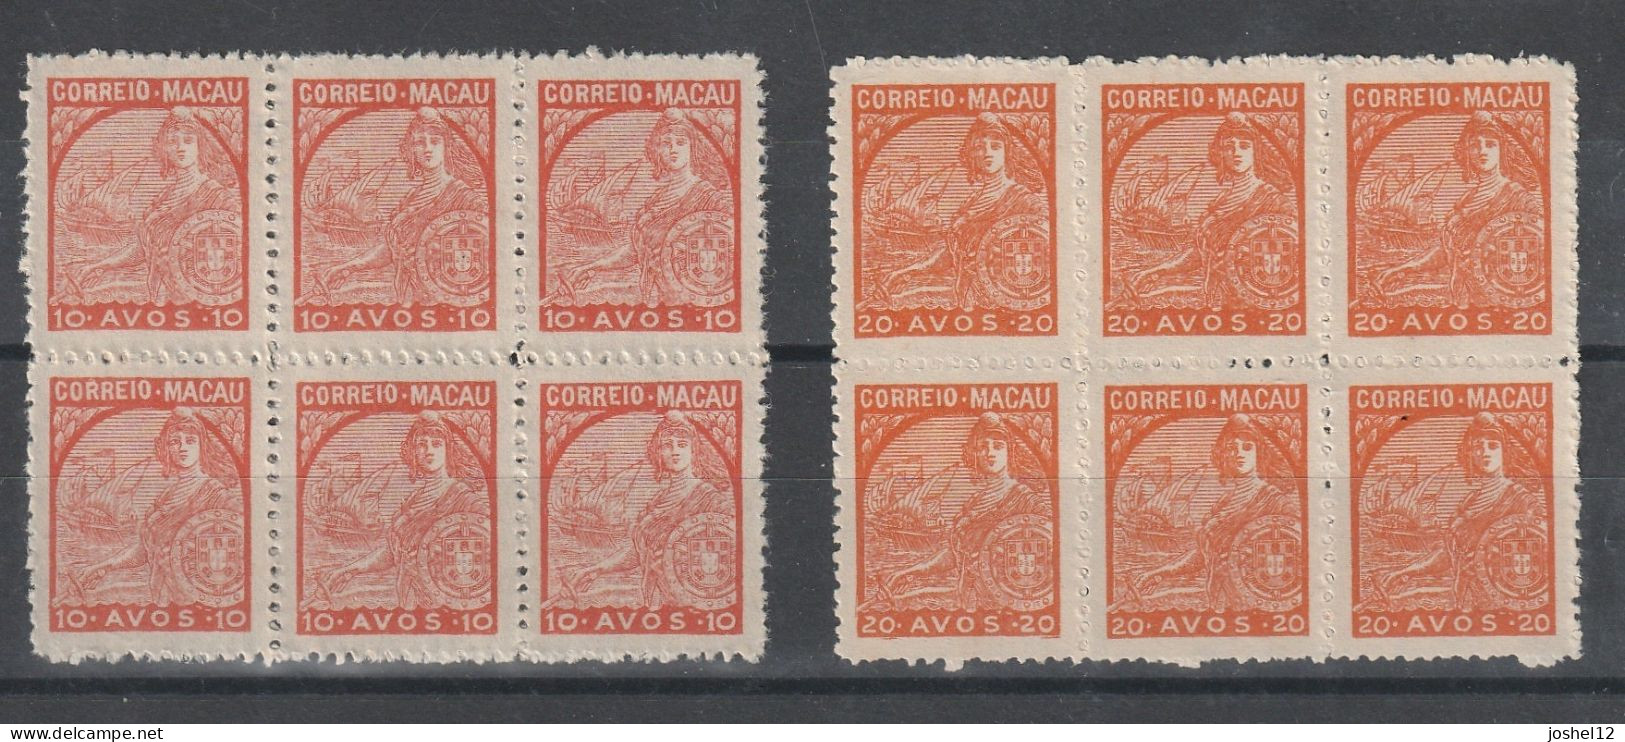 Macau Macao 1942 Padroes Set Sin Chun Print Thick Paper Block Of 6. MNH/No Gum As Issued. - Neufs